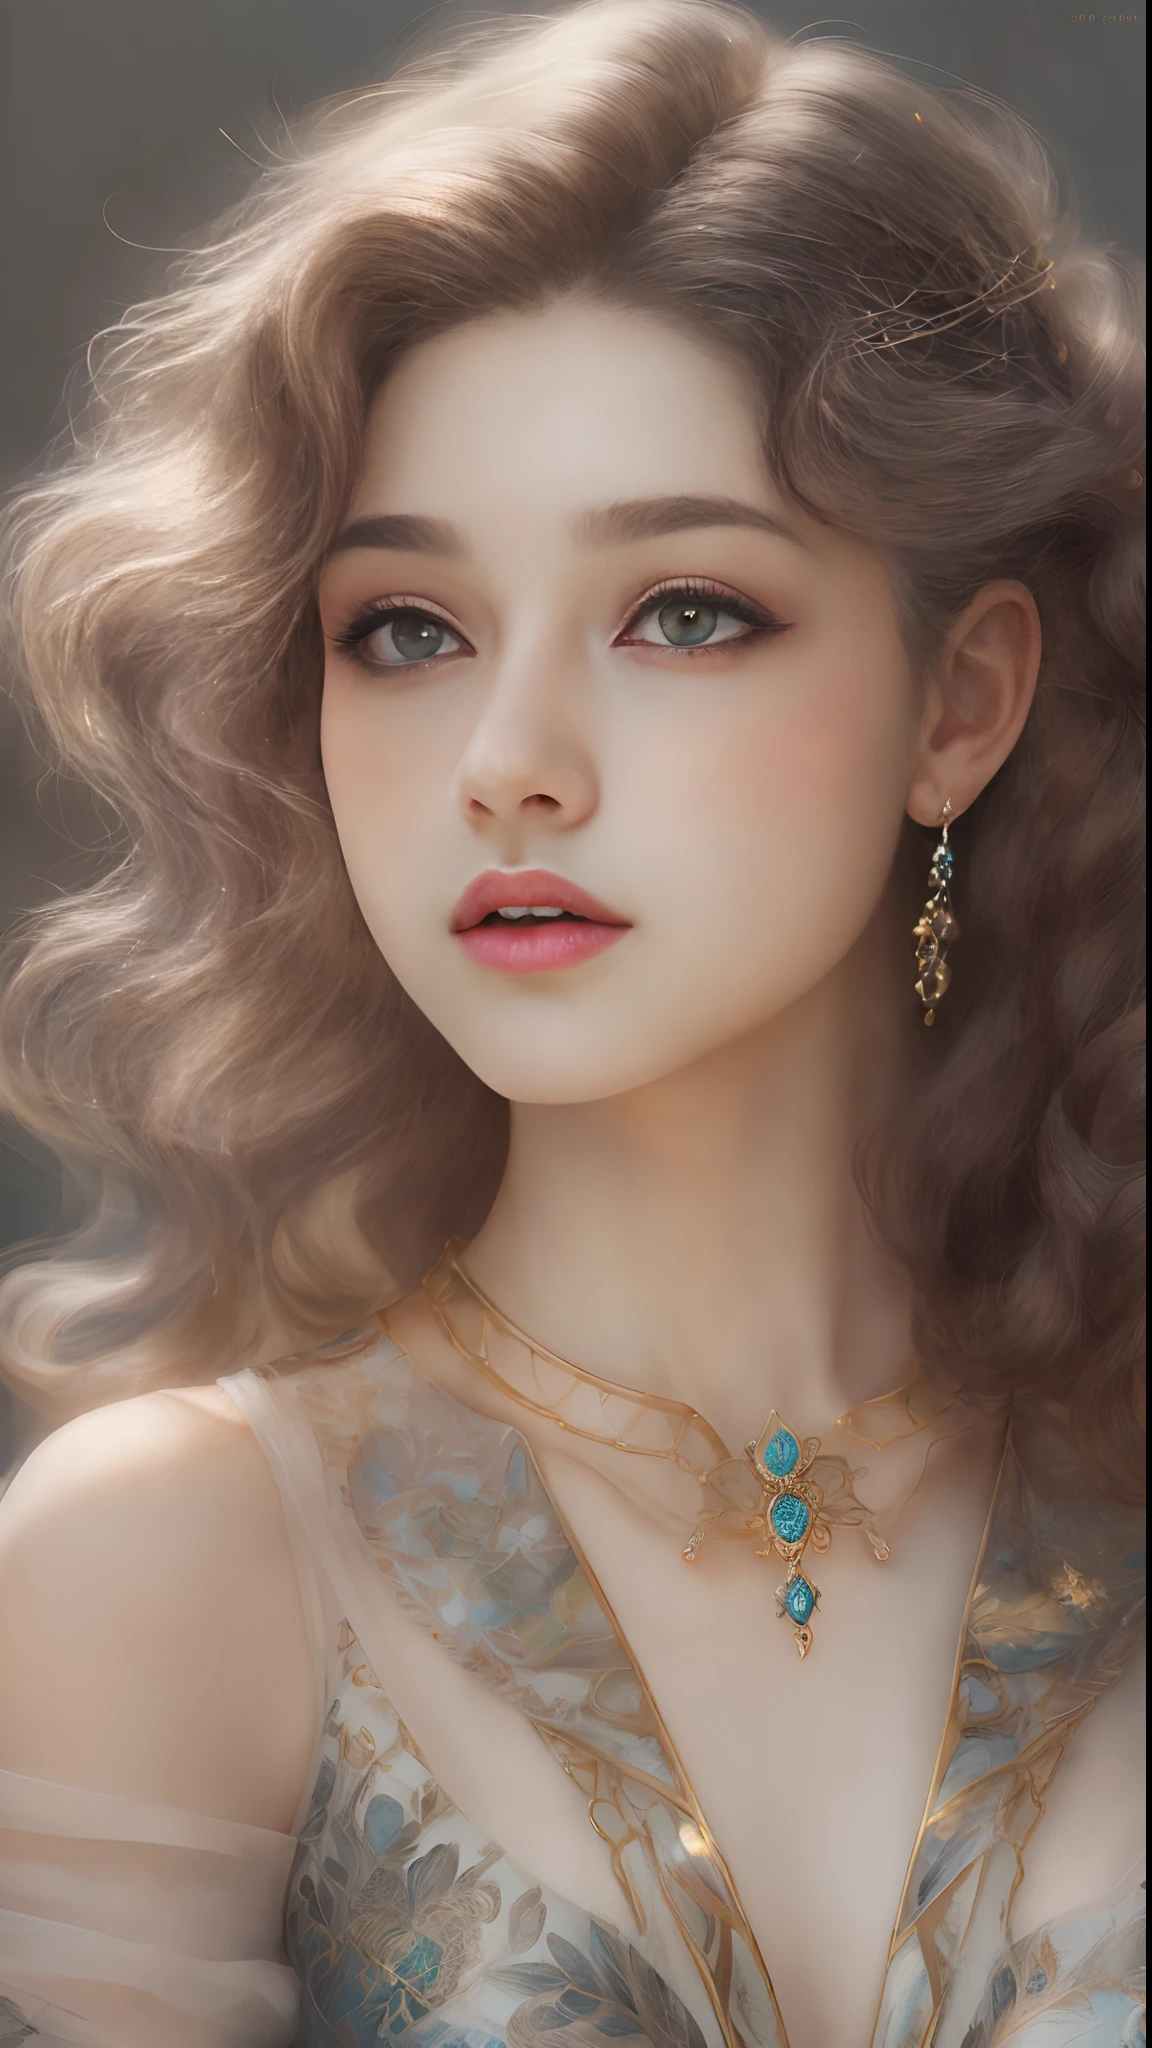 (Best quality, 4K, 8K, A high resolution, Masterpiece:1.2), Ultra-detailed, Realistic portrait of the upper body of an 18 year old aristocratic girl, Exquisite facial features，Clear and shiny eyes，Long curly hair details expressed, The posture is leisurely and natural，Graceful posture, The golden ratio of the head and body，Dreamy atmosphere, expressive brush strokes, mystical ambiance, Artistic interpretation,Delicately coiled hair，Floral filigree crystal diamond jewelry，Ultra ultra detail，Fresh and ultimate aesthetics，Stunning intricate costumes, Fantasy illustration, Subtle colors and tones, mystical aura,The details have been upgraded